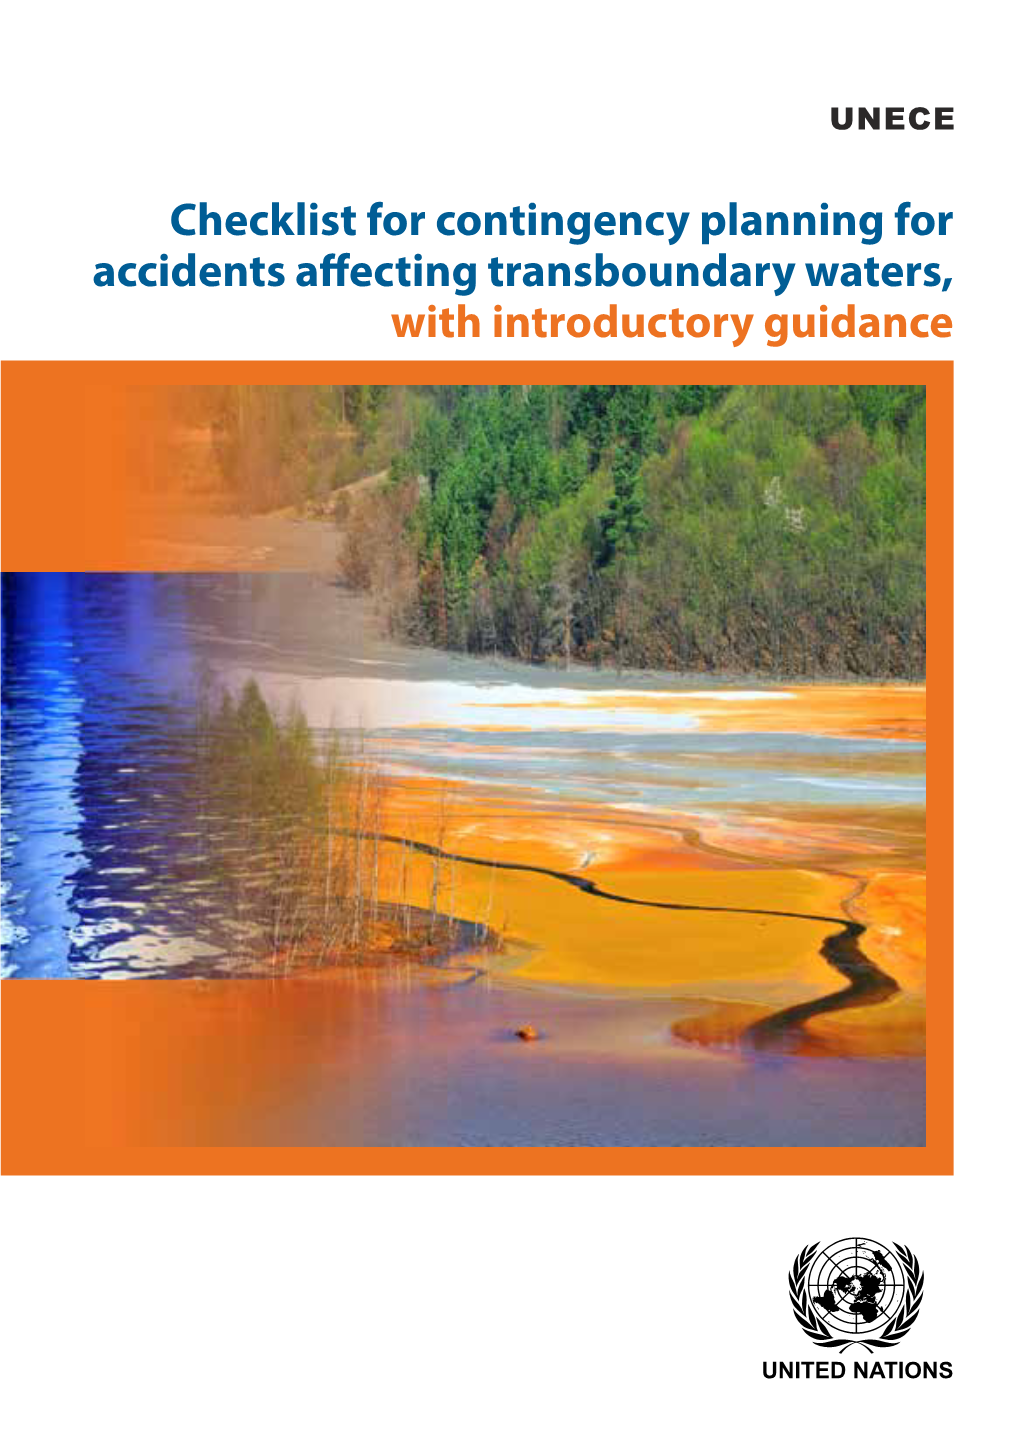 Checklist for Contingency Planning for Accidents Affecting Transboundary Waters, with Introductory Guidanceunece